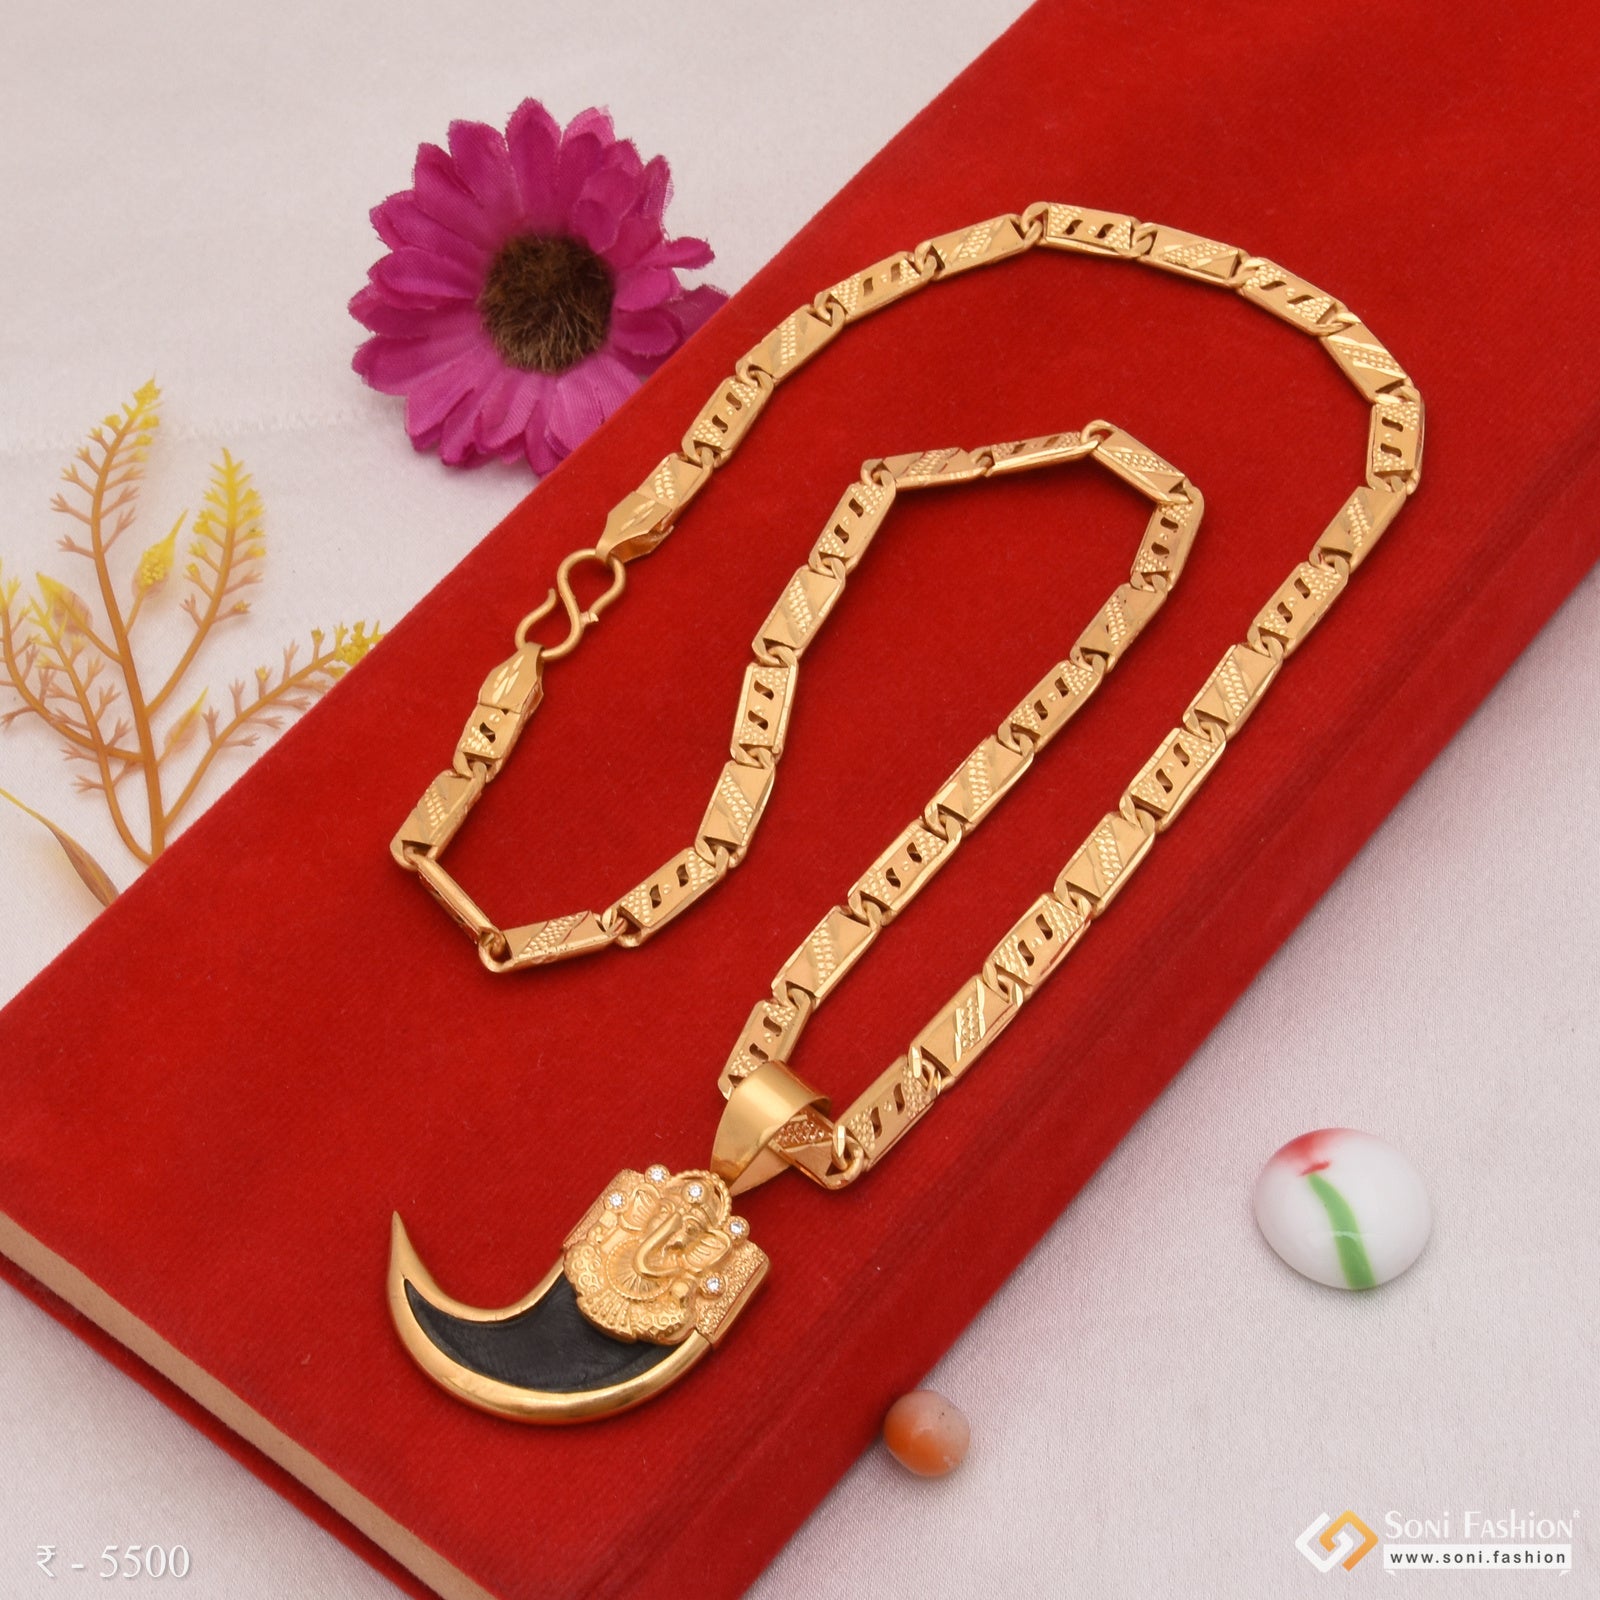 Buy Gold Plated Lion Nail Locket Design with Short Chain for Men